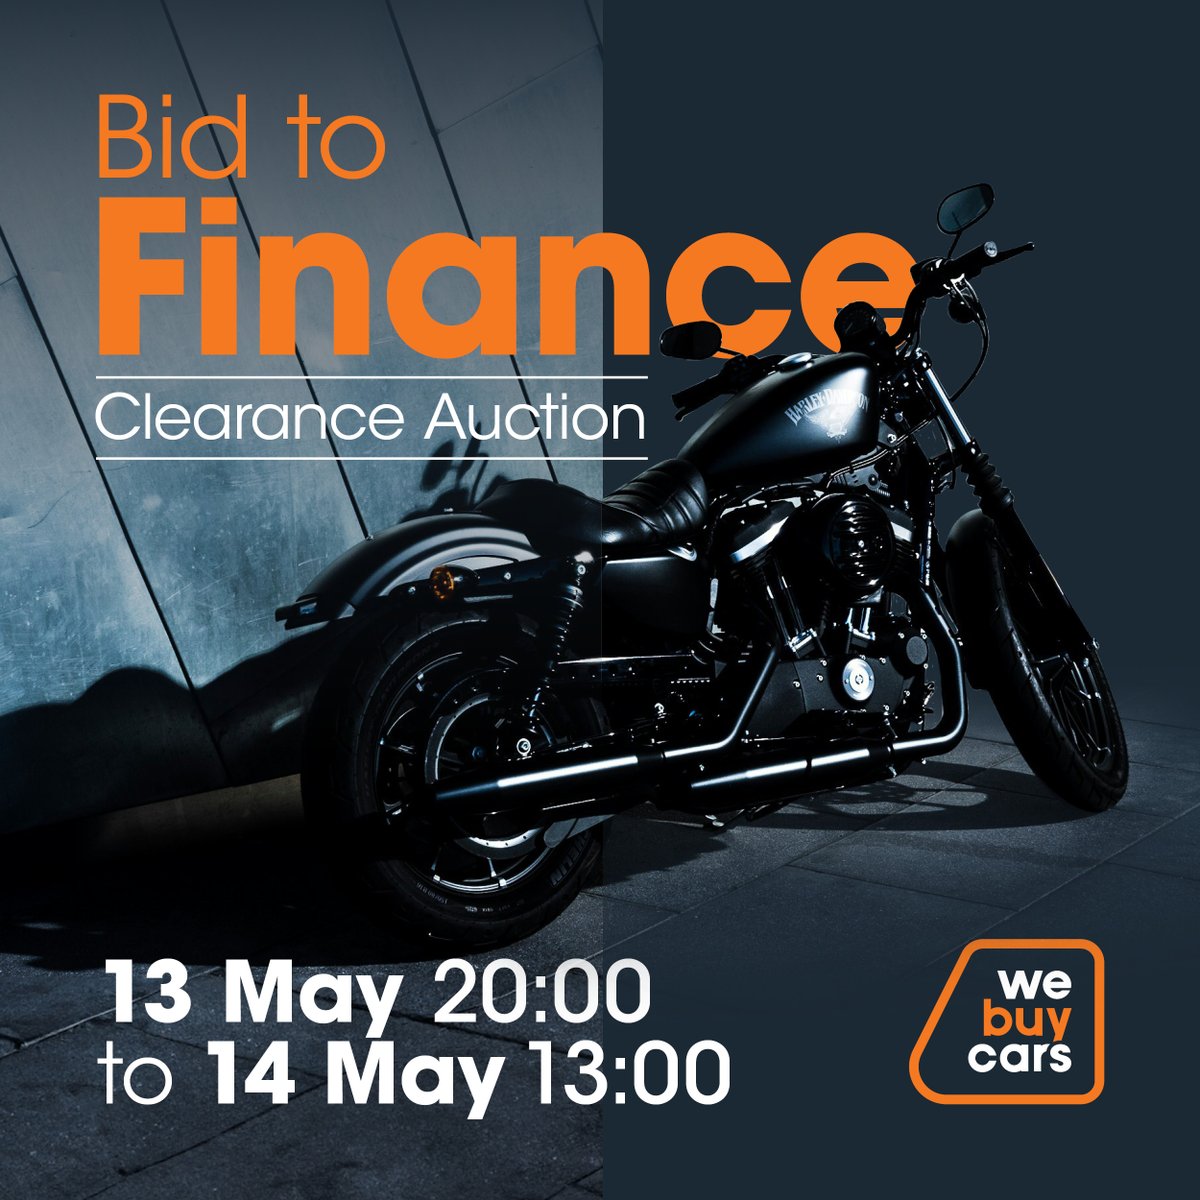 Did you know that you can bid in our Clearance Auction and apply for financing as well? 🙌 We can't think of anything better... #carsforsale #preownedcars #usedcars #usedcarsforsale #carshopping #carfinance #autosales #carsales #carlifestyle #motorbike